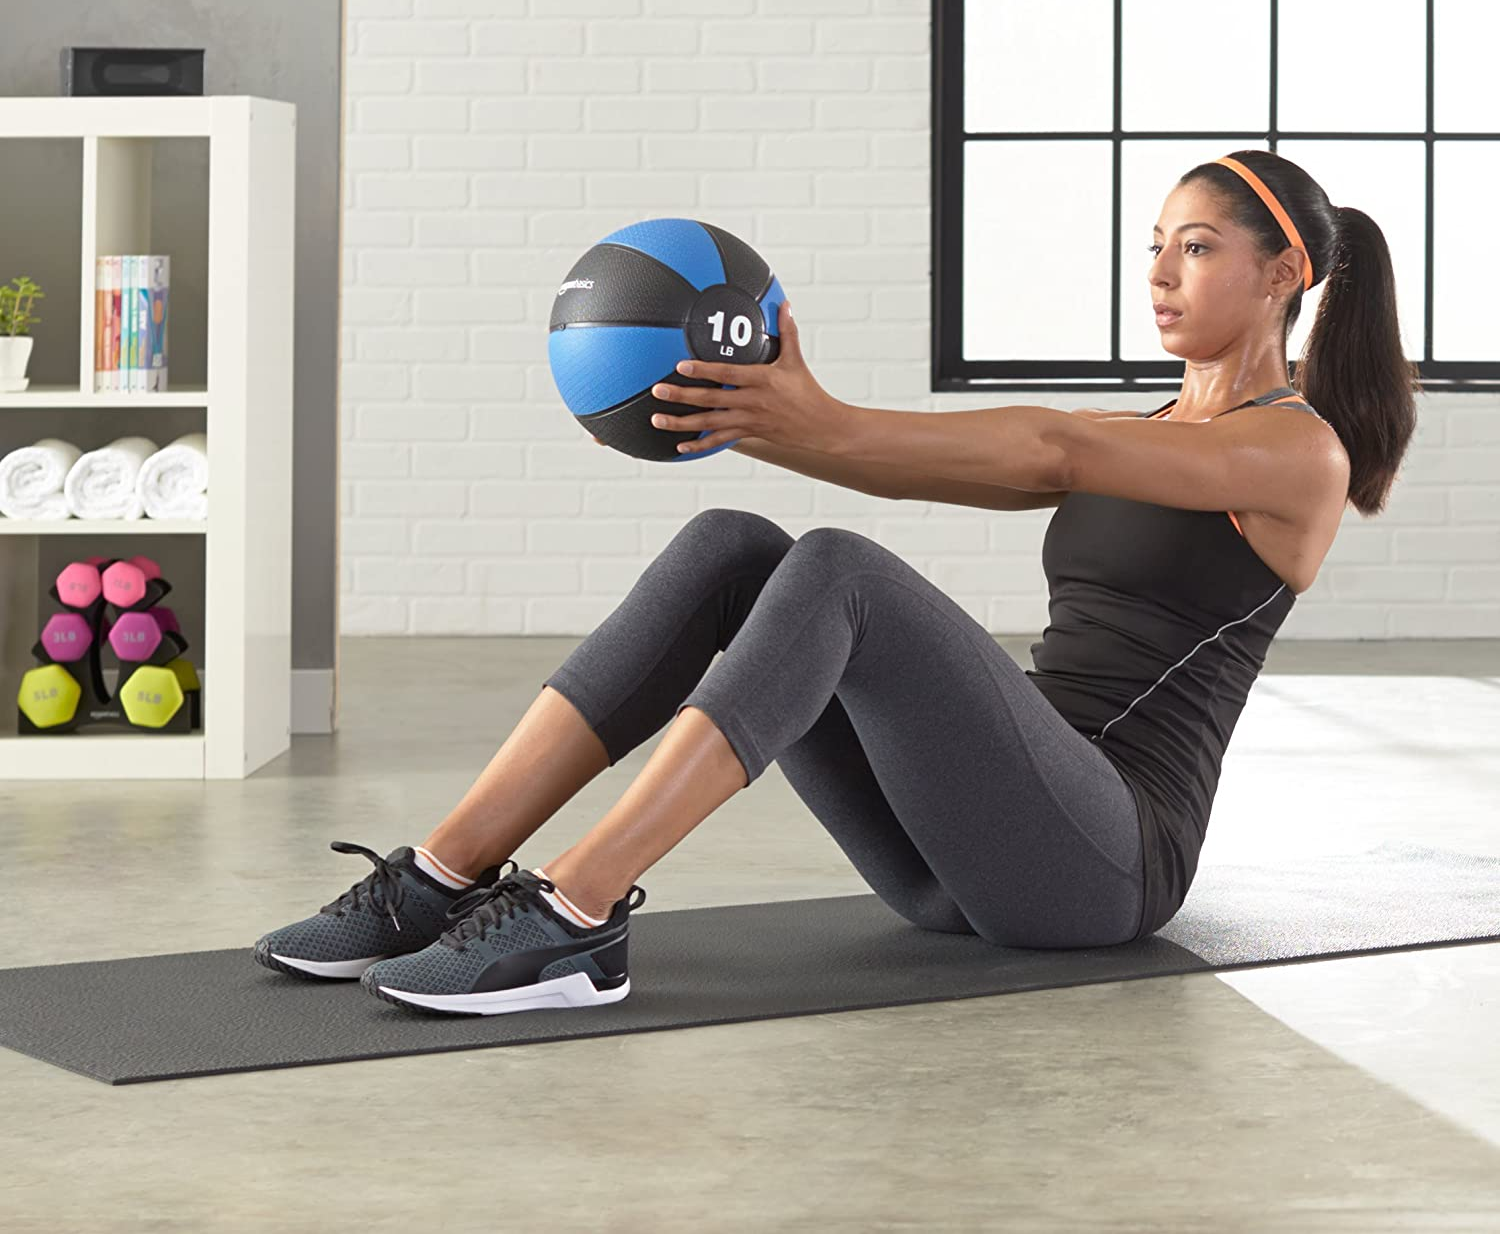 model uses blue 10-pound exercise ball to do core moves at home